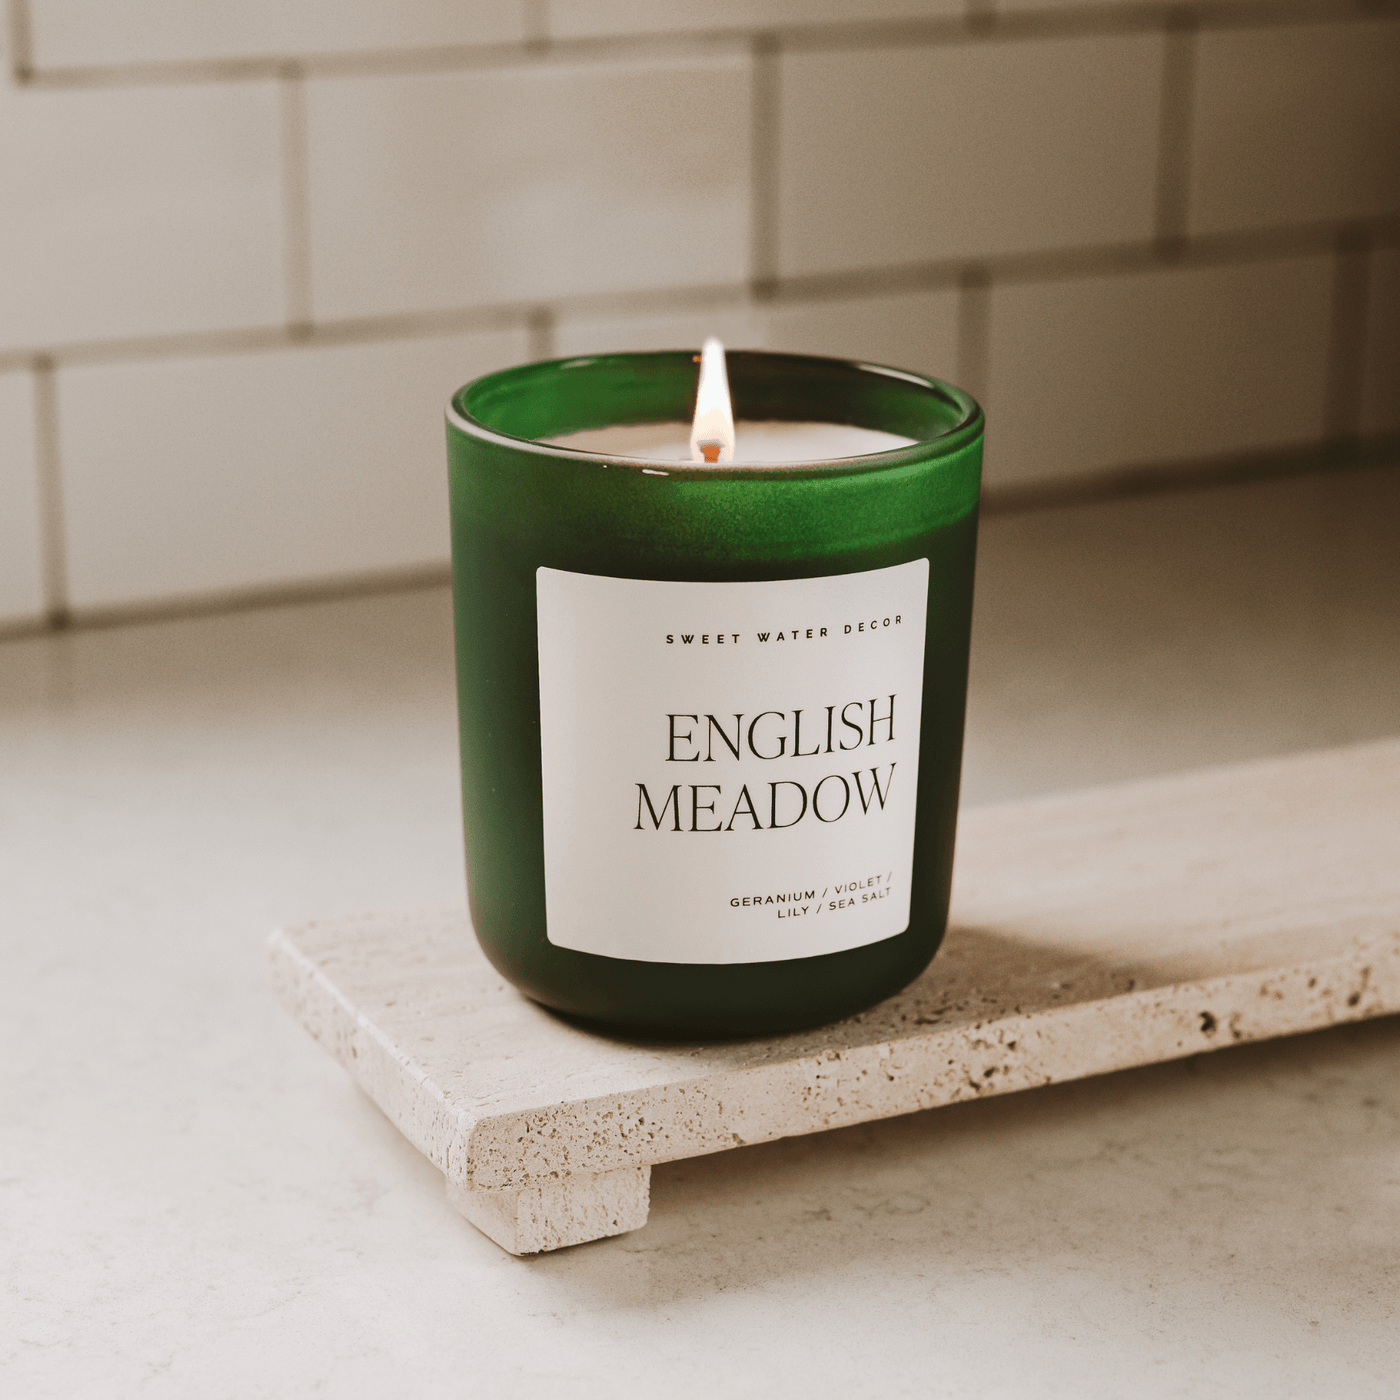 English Meadow Soy Candle - Green Matte Jar - 15 oz (Wildflowers and Salt) - Sweet Water Decor - Candles